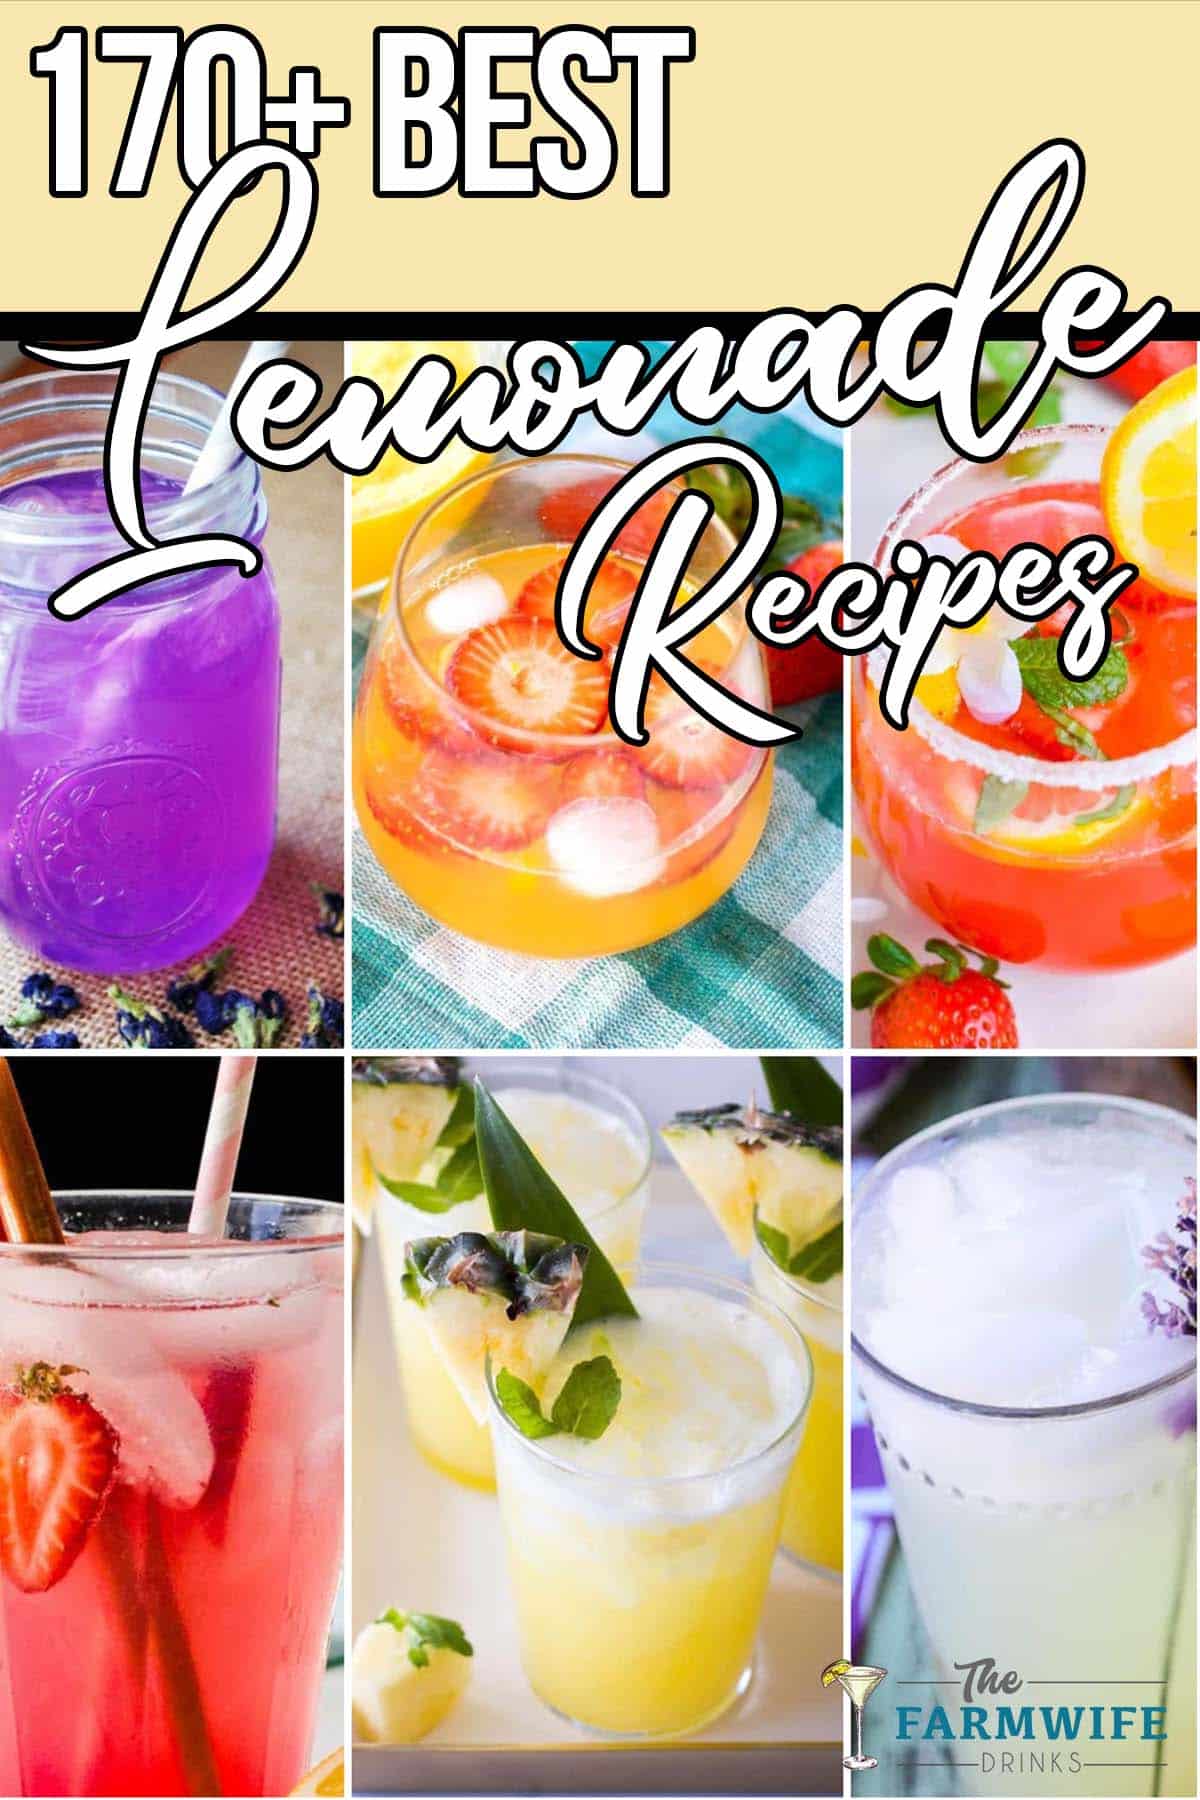 photo collage of lemonade variations with text which reads 170+ best lemonade recipes 